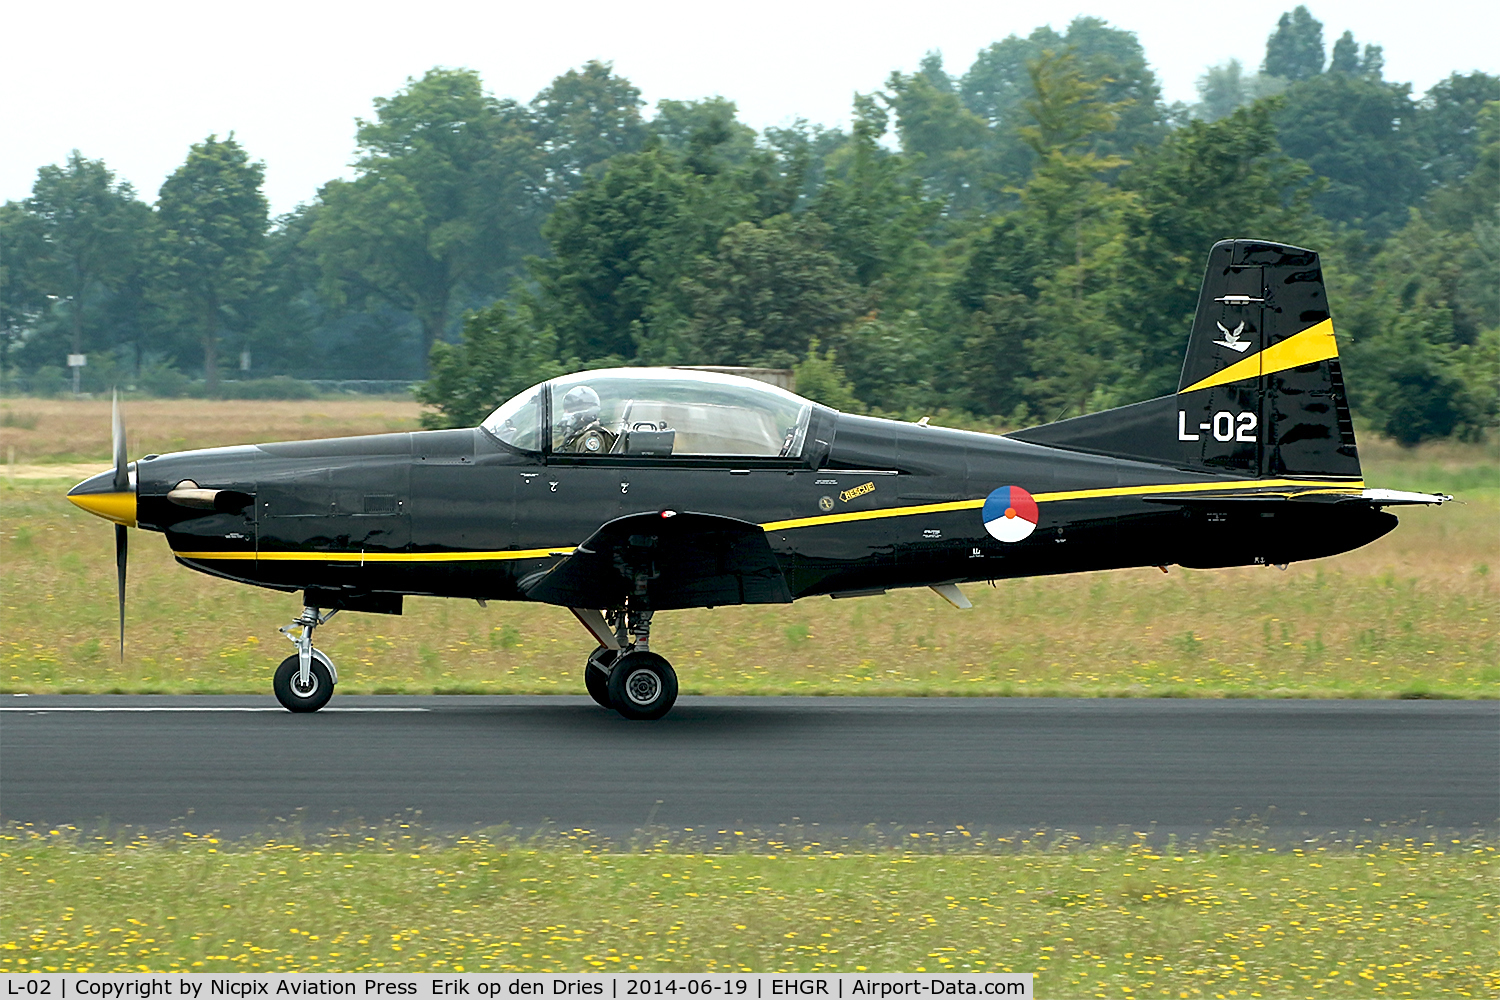 L-02, Pilatus PC-7 Turbo Trainer C/N 539, L-02 seen here on the runway of Gilze-Rijen AB, The Netherlands